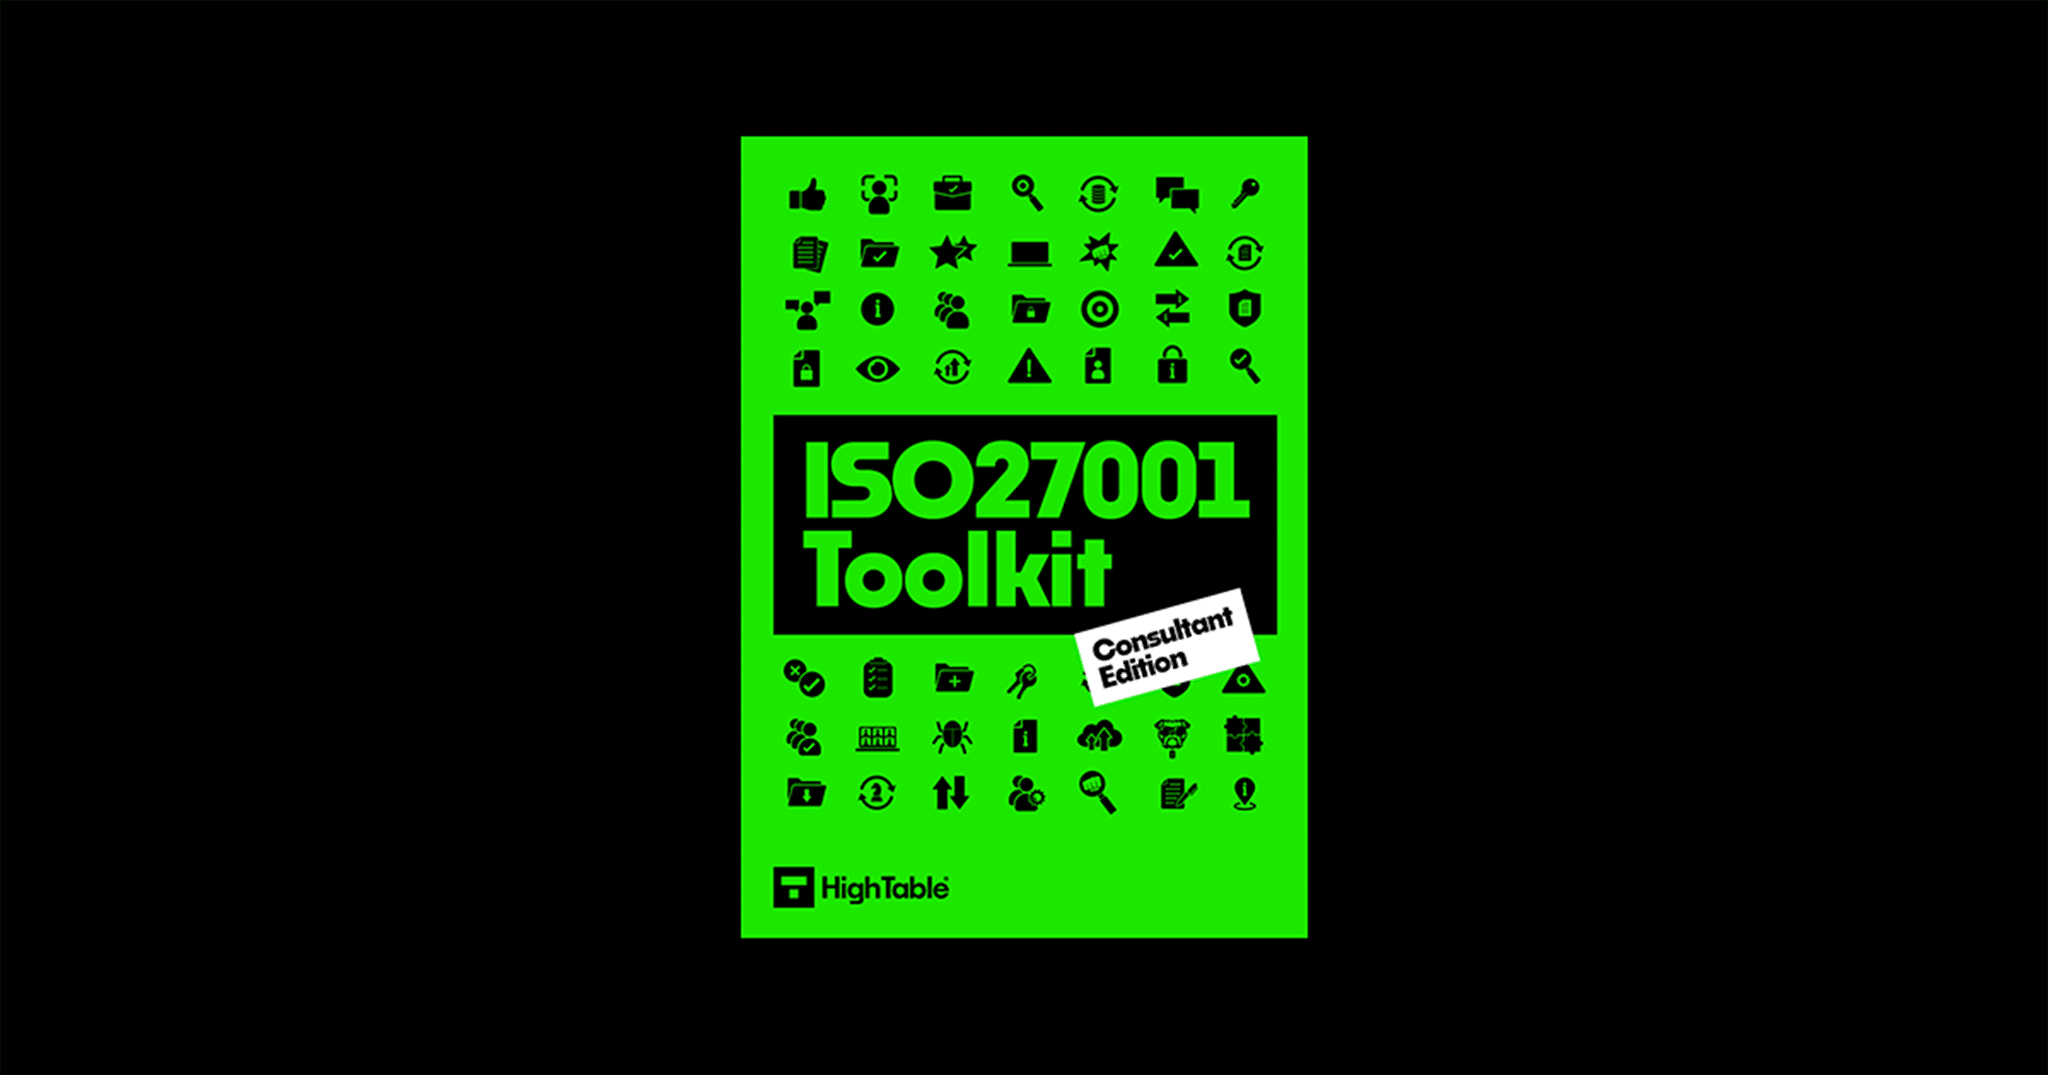 Become A Top ISO27001 Consultant With This Toolkit